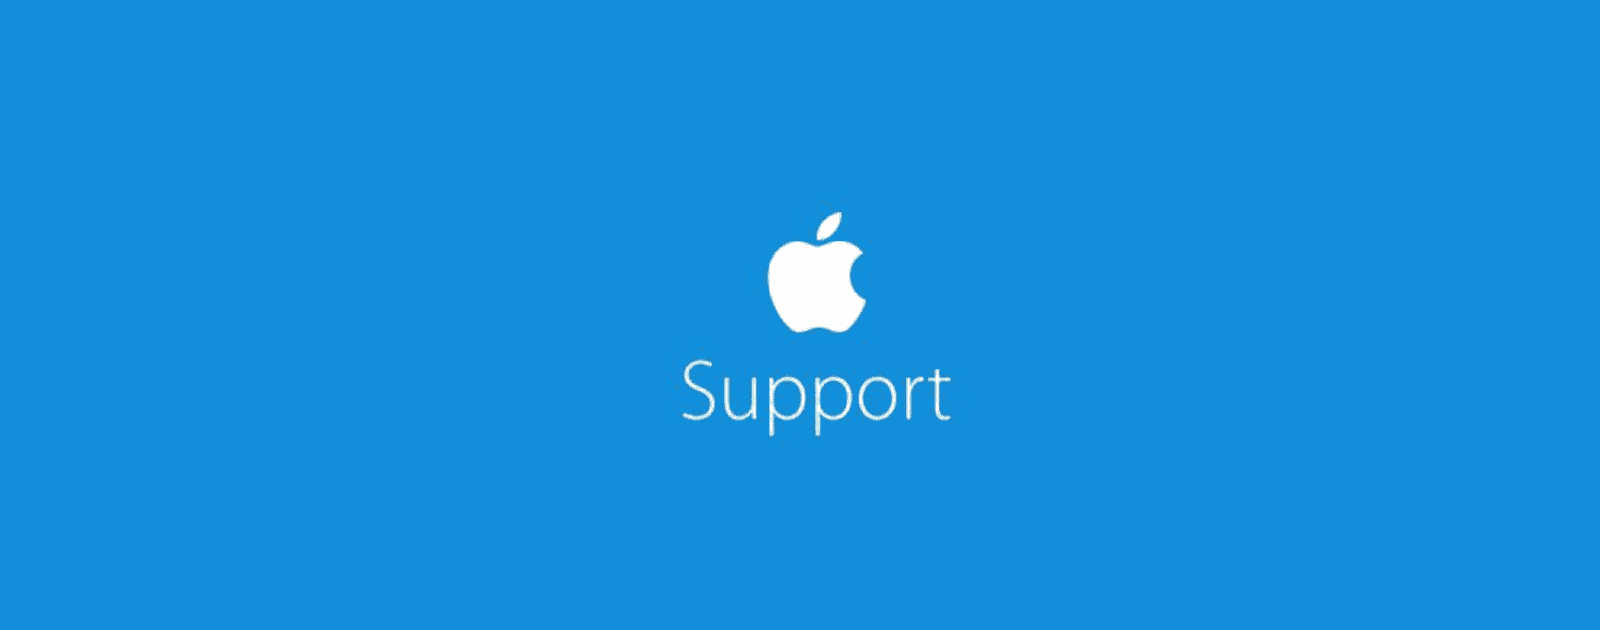 Apple Support Comes to YouTube With Official Channel